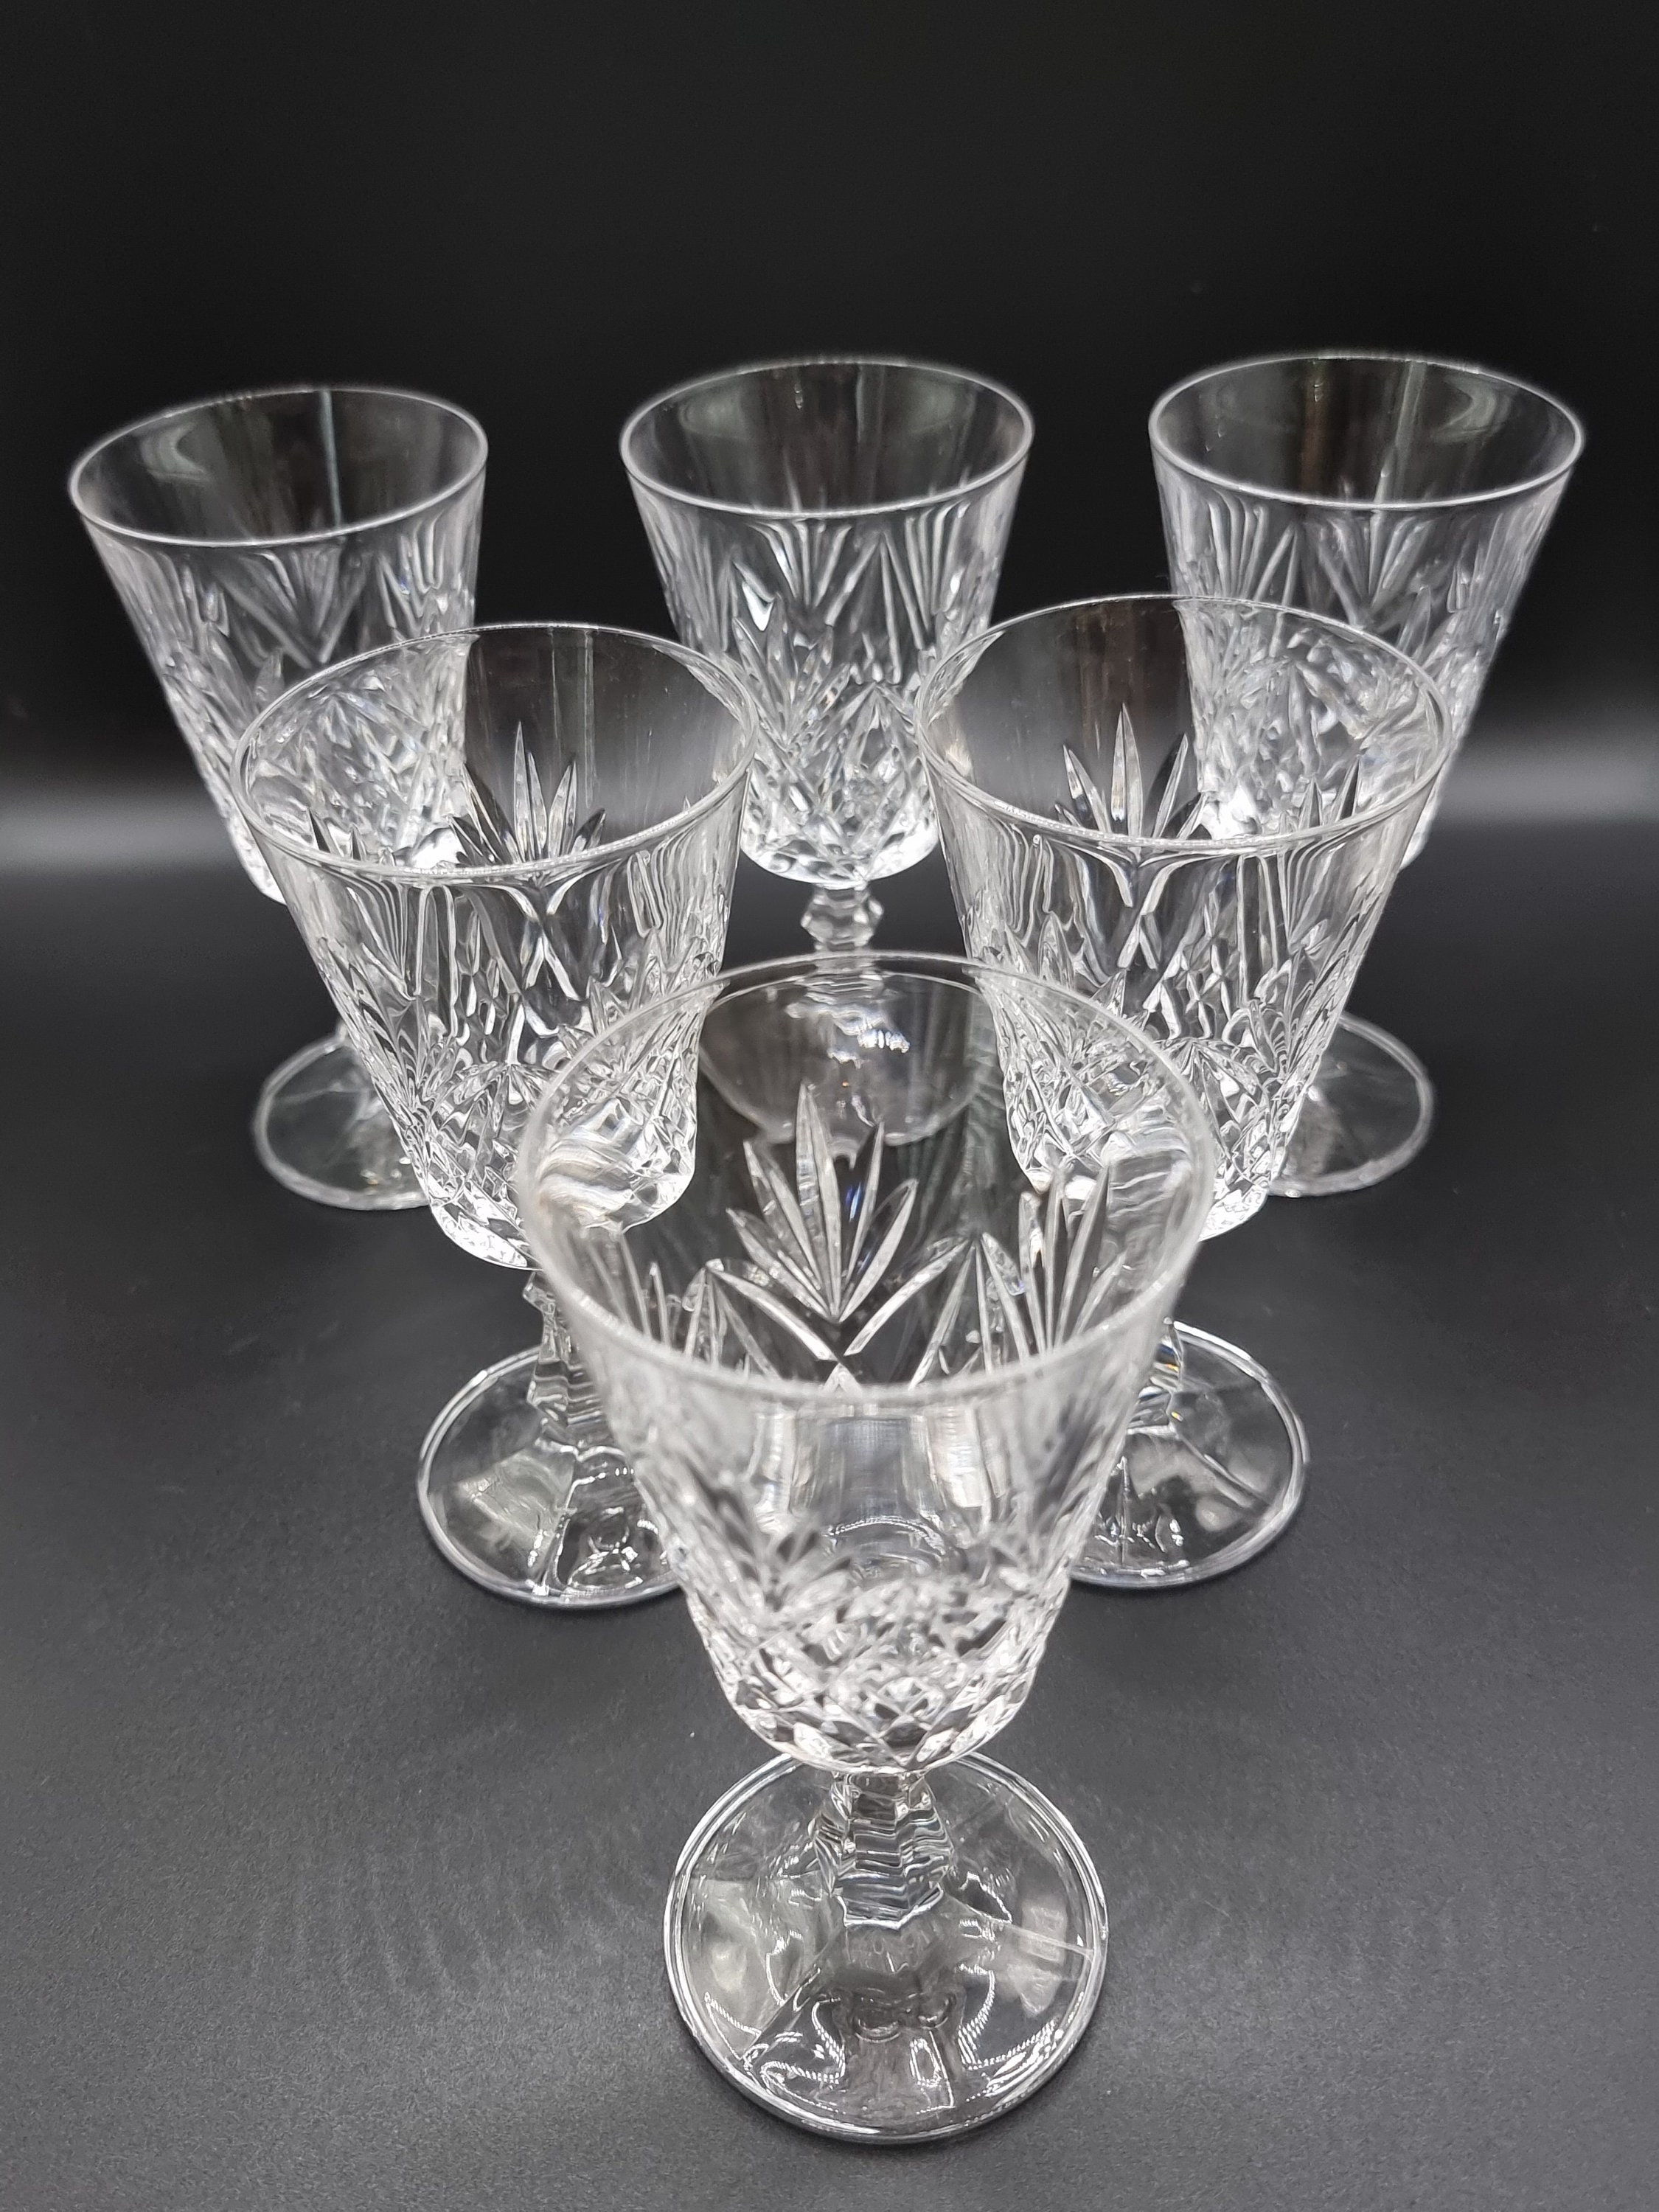 Elegant and Modern Russian Cut Crystal Drinking Glasses for Hosting Parties  and Events - 1oz, Shot Crystal Glass, Set of 6 